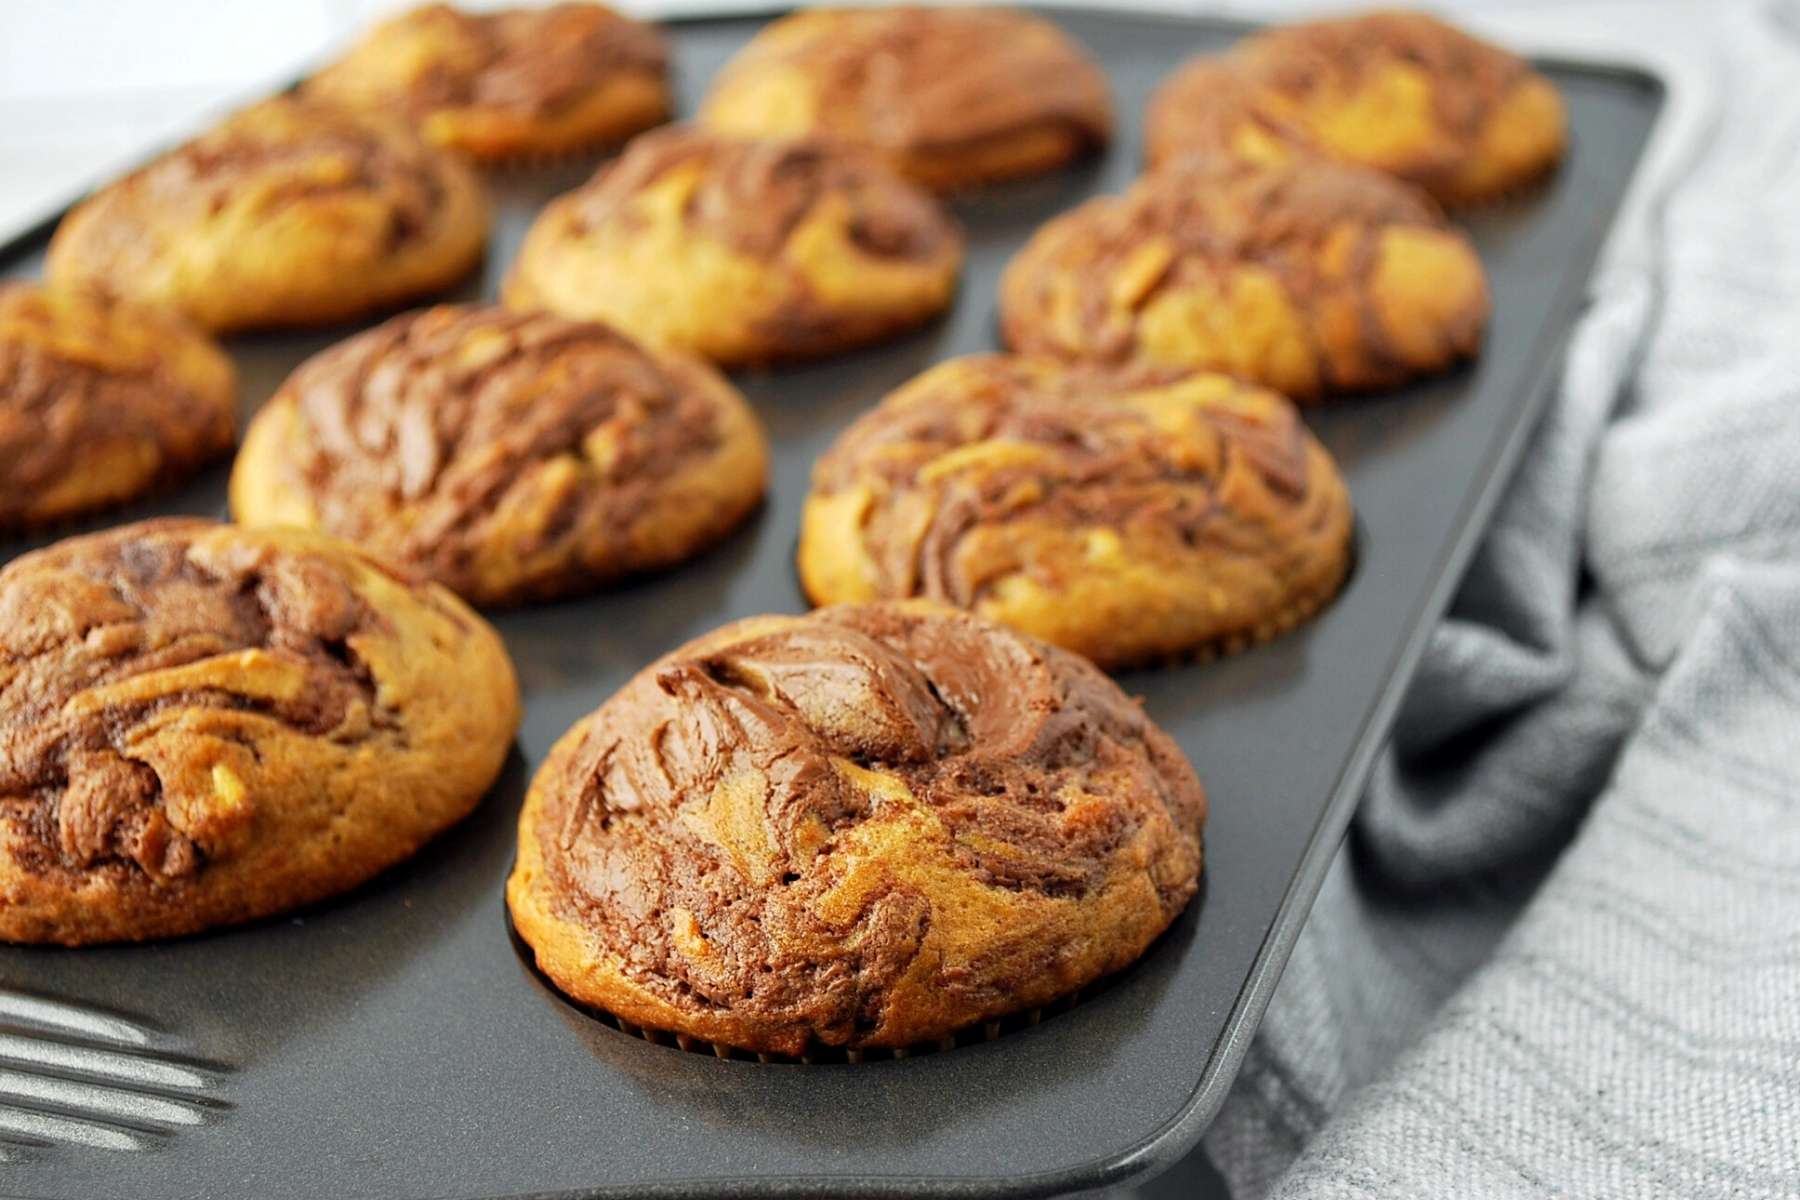 banana nutella muffins freshly baked in a muffin pan